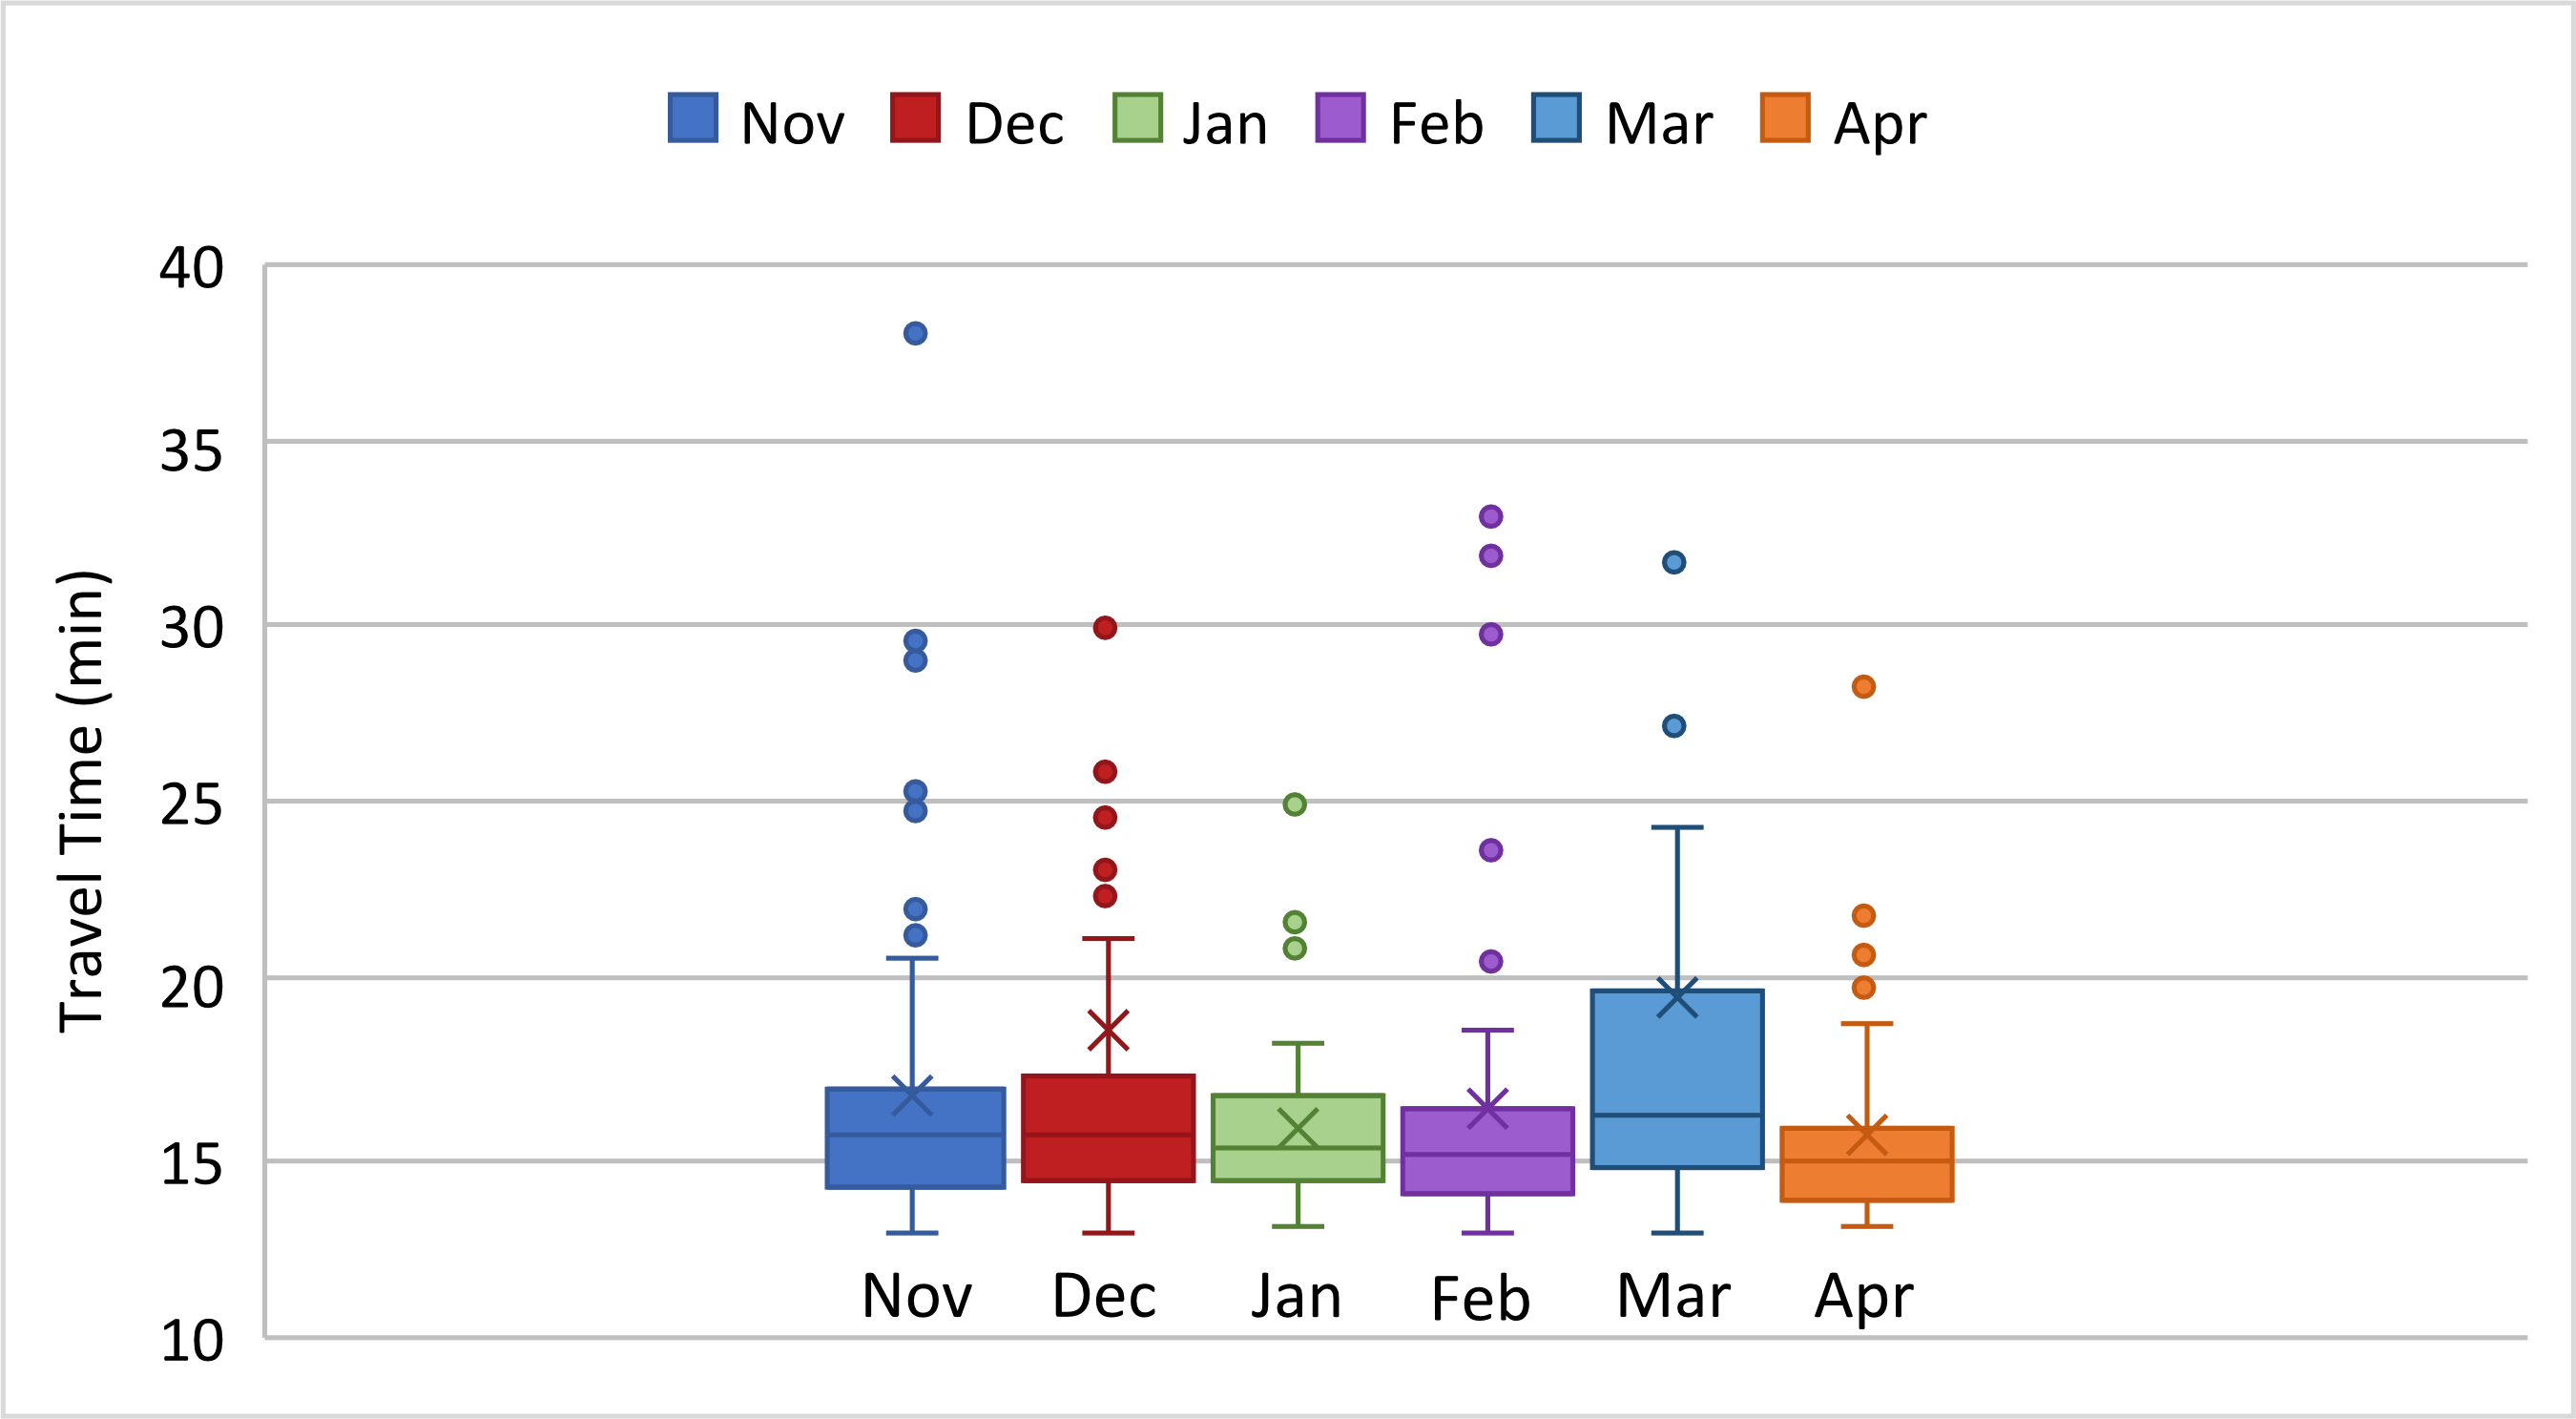 A box and whisker plot is shown for travel time each month between November and April.  Units are in minutes.  For November, the box goes from about 14 to 17 and the whisker goes from about 13 to 21 with four outliers between 22 and 38.  For December, the box goes from about 14 to 17 and the whisker goes from about 13 to 21 with five outliers between 22 and 30.  For January, the box goes from about 14 to 17 and the whisker goes from about 13 to 18 with three outliers between 21 and 25.  For February, the box goes from about 14 to 16 and the whisker goes from about 13 to 19 with five outliers between 20 and 34.  For March, the box goes from about 15 to 20 and the whisker goes from about 13 to 24 with four outliers between 27 and 44.  For April, the box goes from about 14 to 16 and the whisker goes from about 13 to 24 with four outliers between 20 and 29.